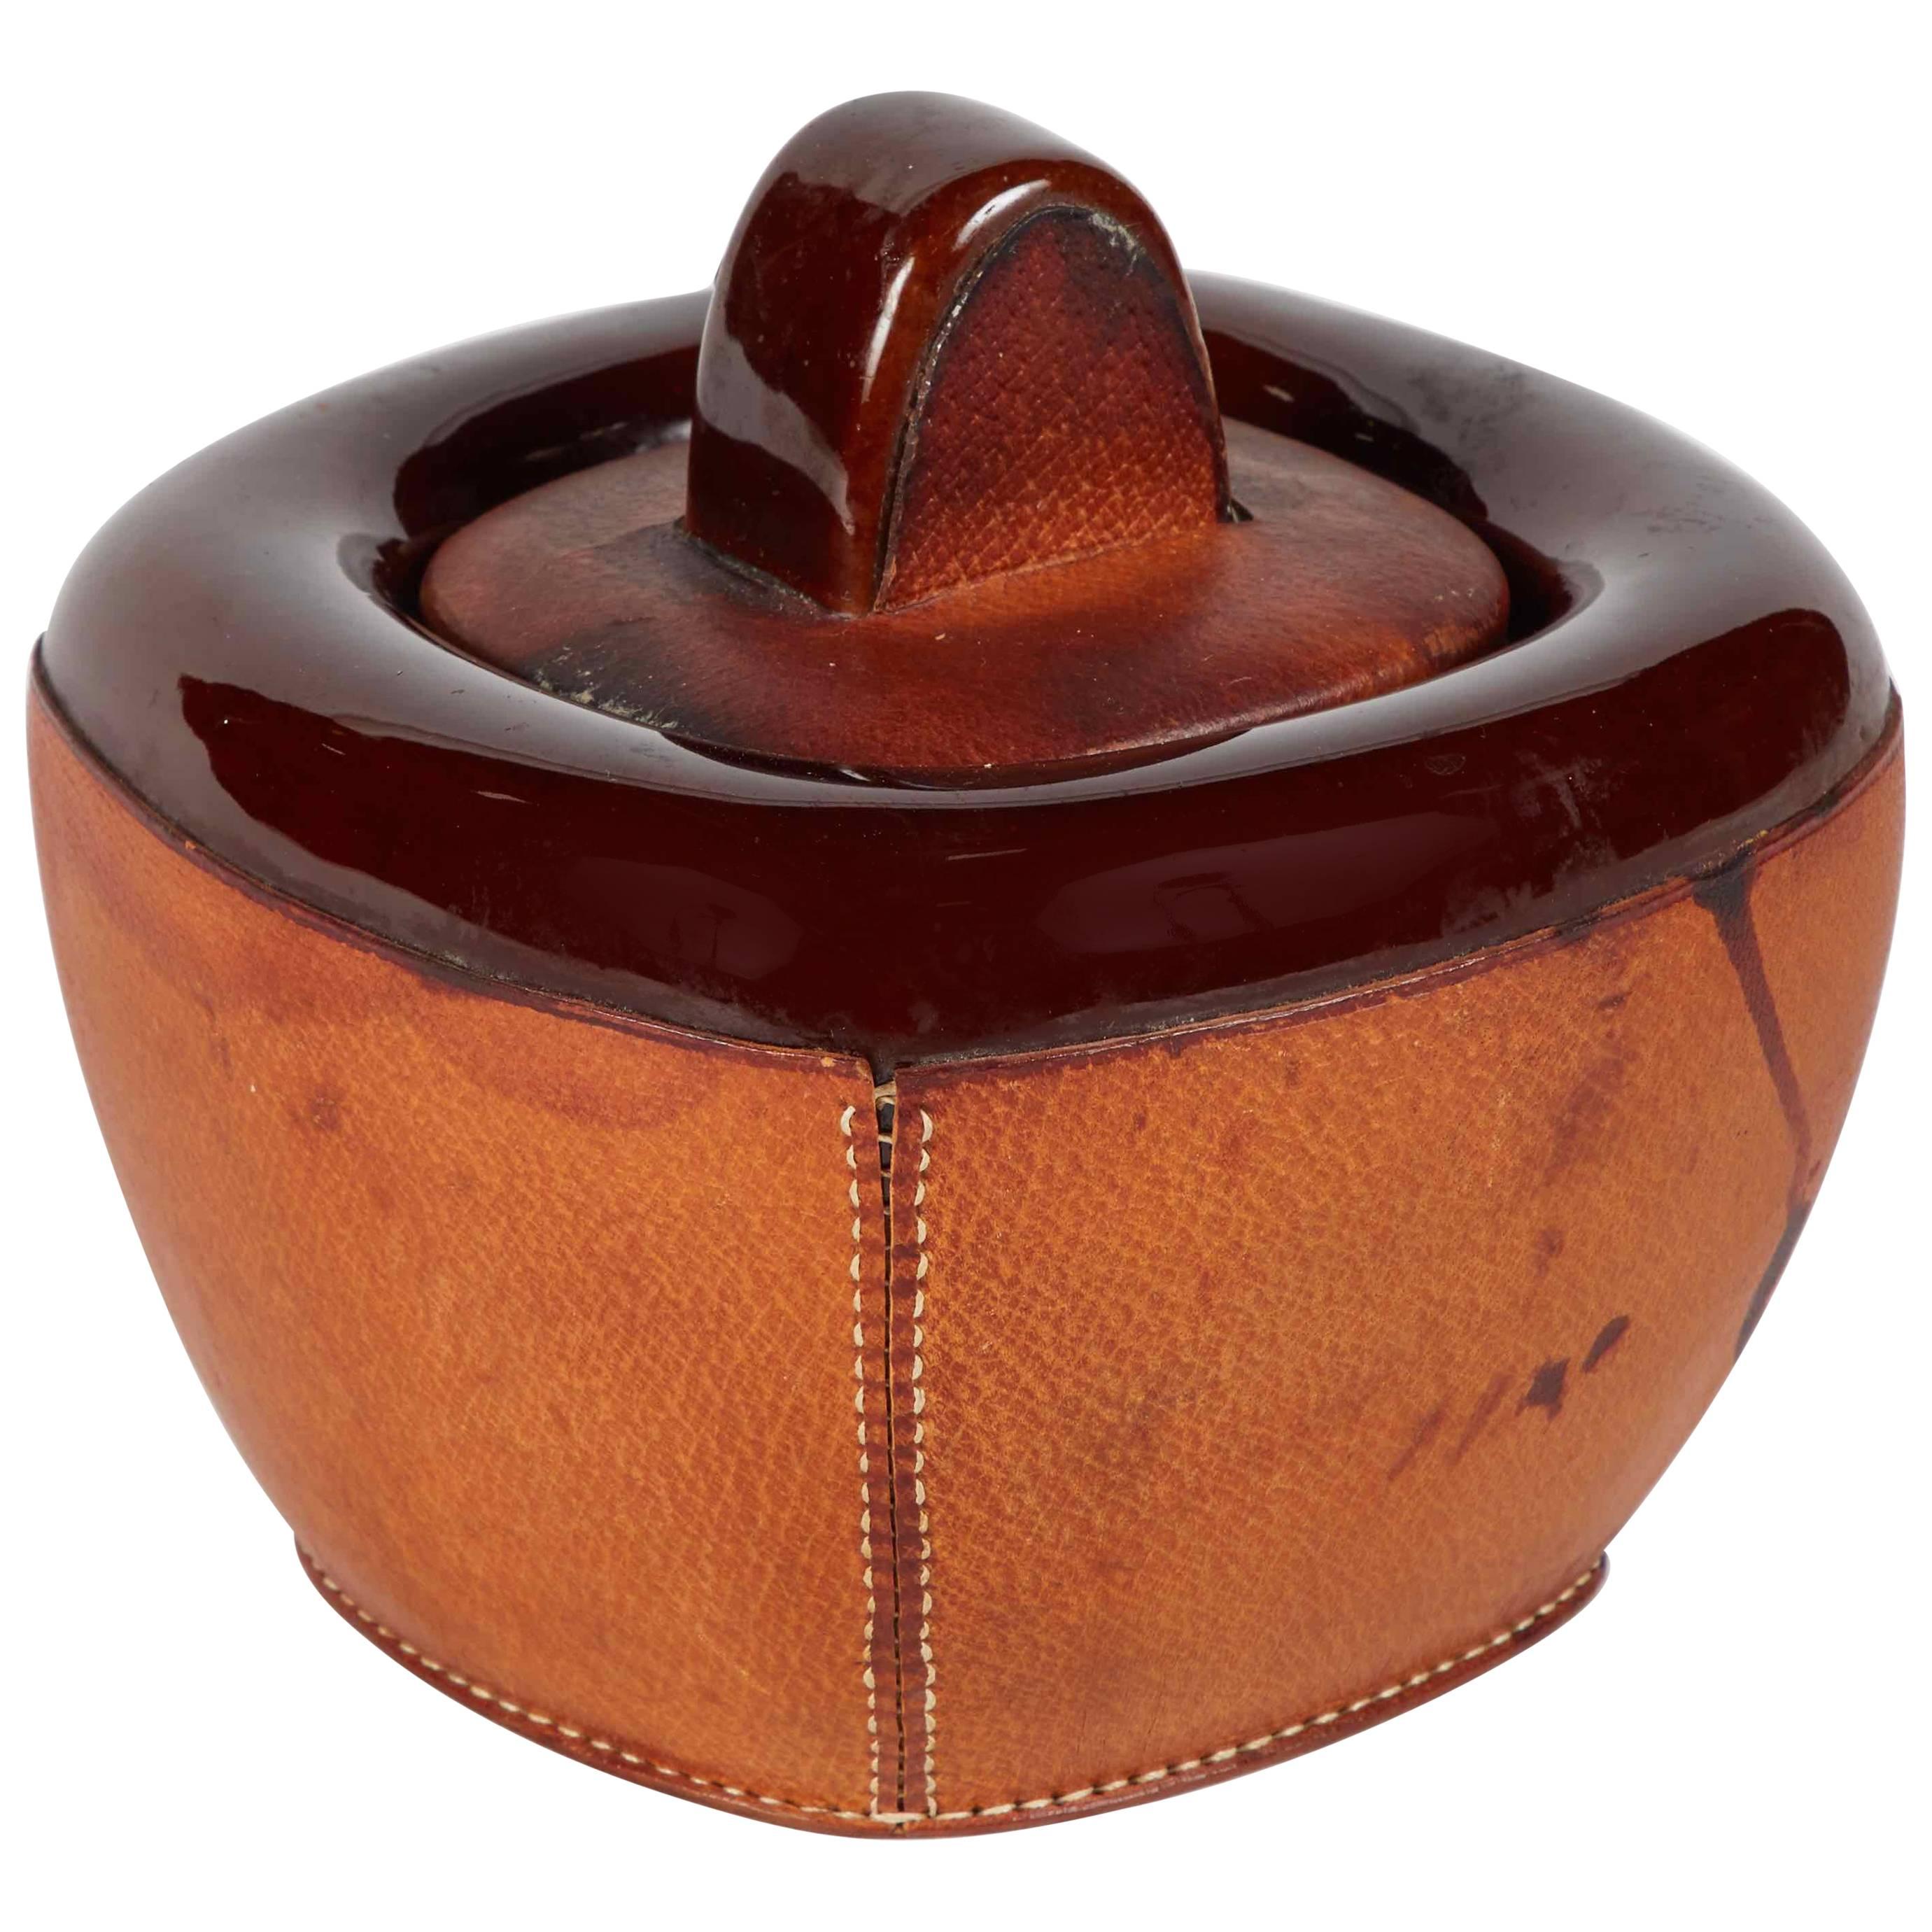 A Small Pottery Jar with Brown Leather Decoration and Lid